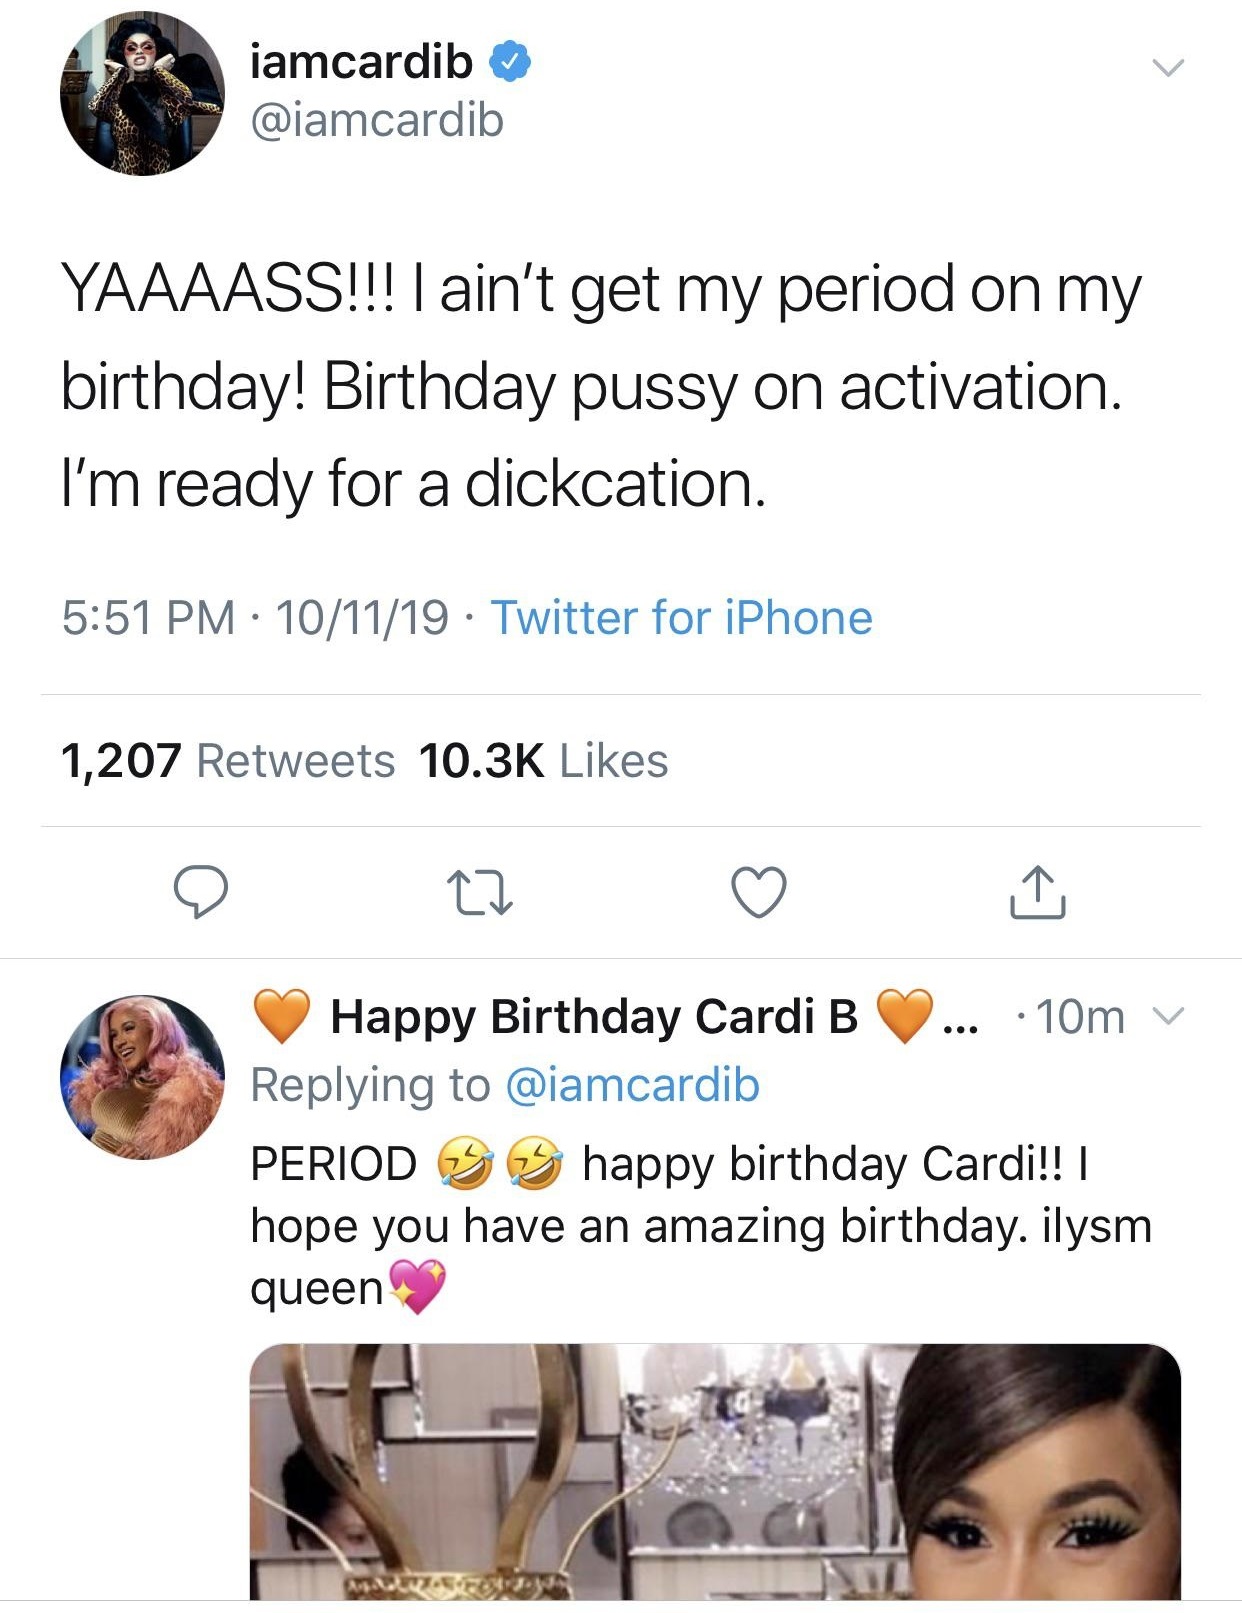 media - iamcardib Yaaaass!!! I ain't get my period on my birthday! Birthday pussy on activation. I'm ready for a dickcation. 101119 Twitter for iPhone 1,207 Happy Birthday Cardi B ... 10m v Period S S happy birthday Cardi!! | hope you have an amazing birt